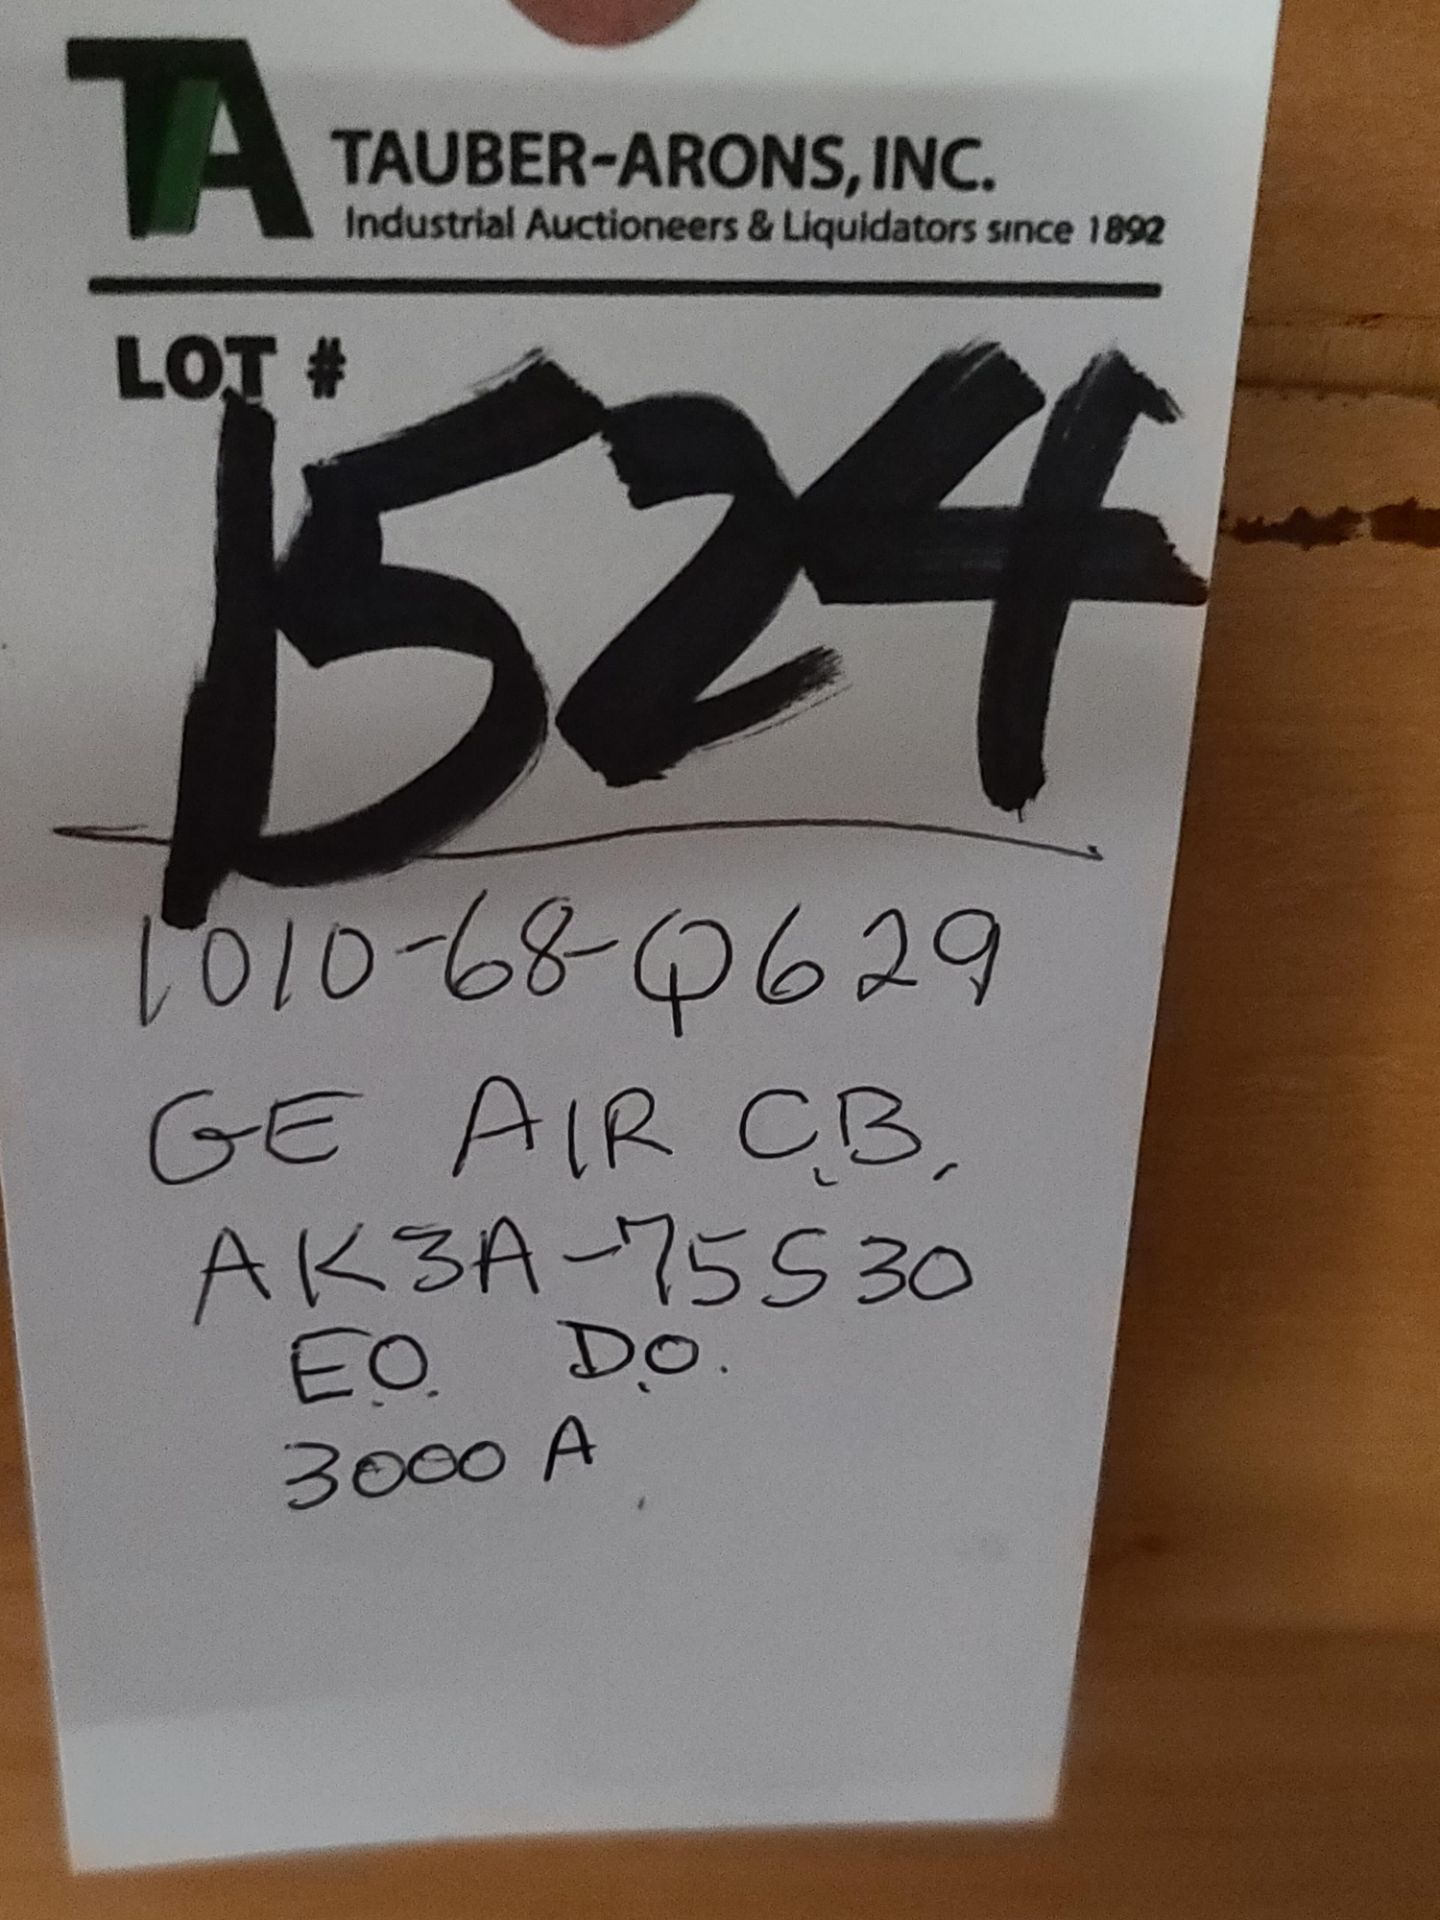 General Electric mod. AK3A-75530, Air Circuit Breaker, EO/DO 3000A (LOADING FEES: $25) - Image 2 of 2